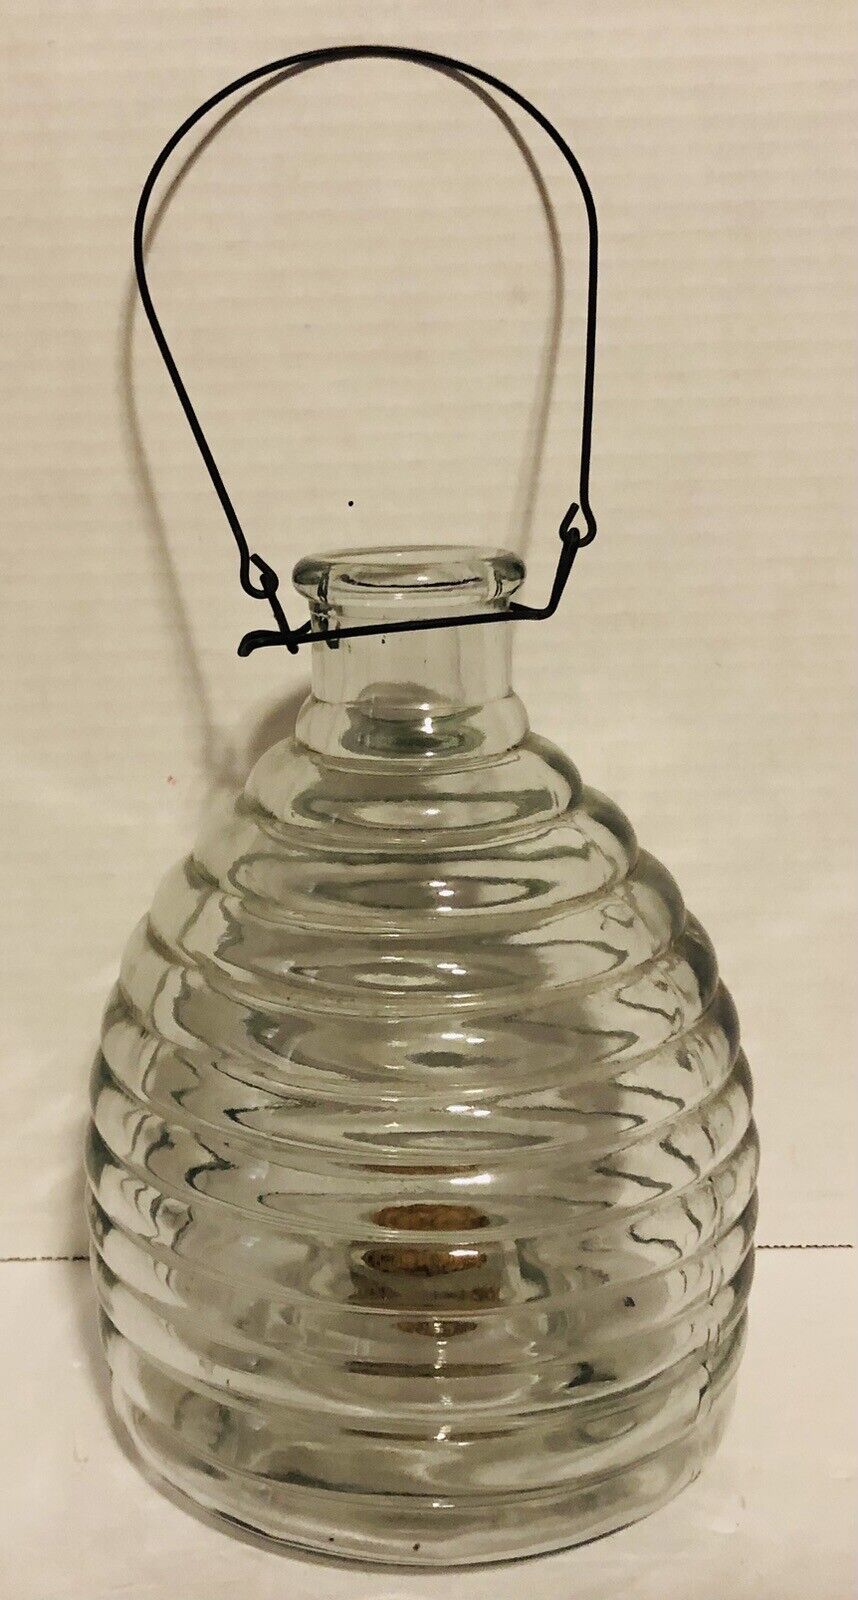 Vintage Glass Beehive Natural Pest Control Wasp Bee Fly Trap Catcher Bail Handle